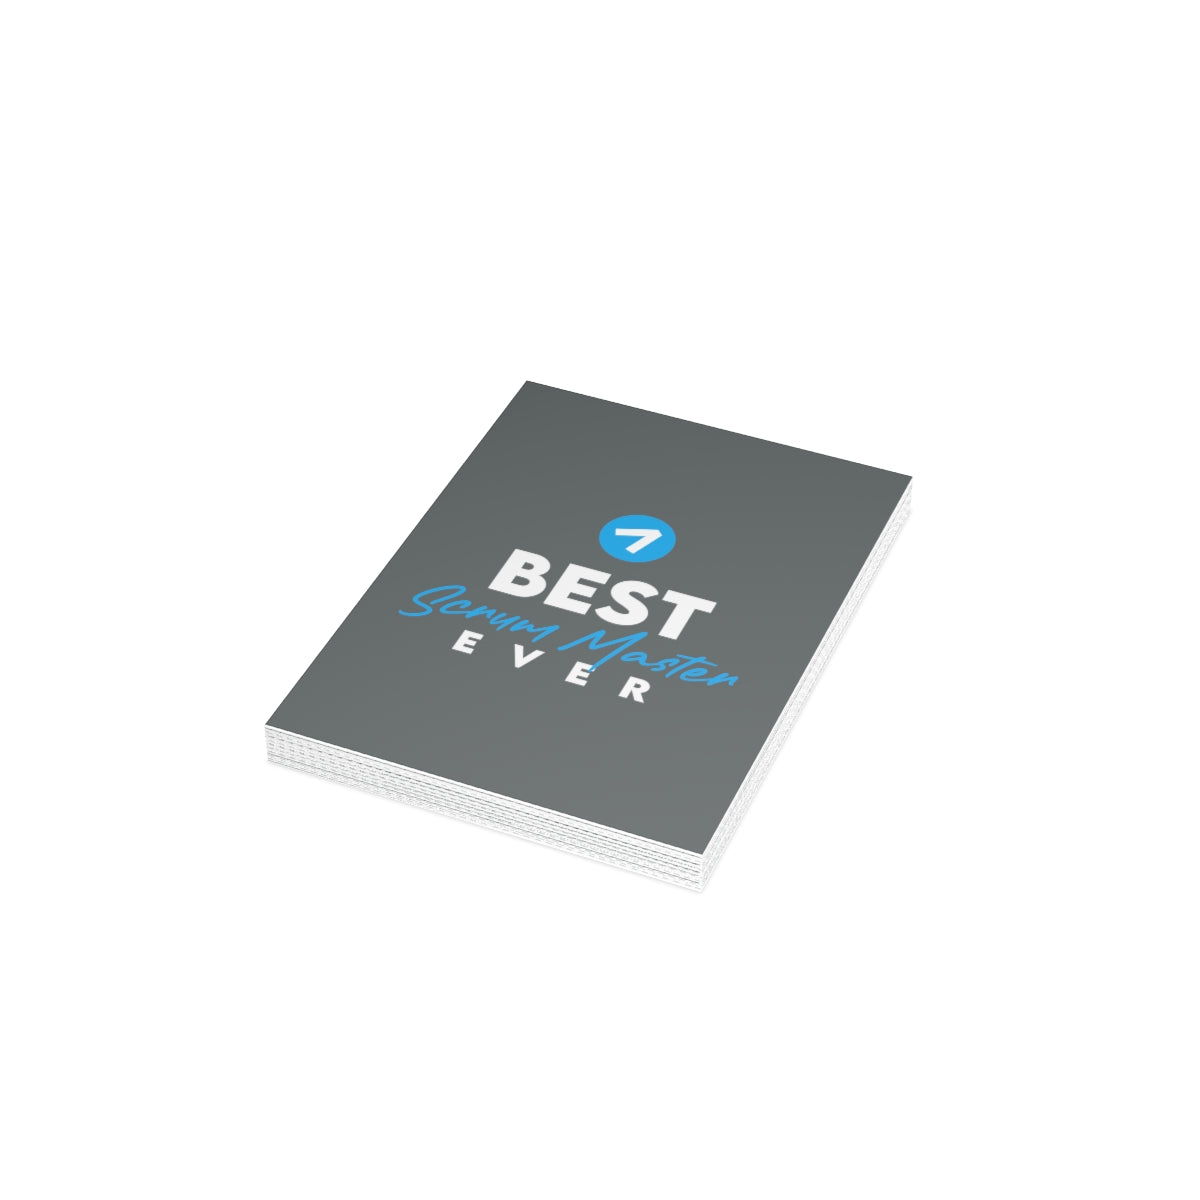 Best Scrum Master ever - Gray Blue - Folded Greeting Cards (1, 10, 30, and 50pcs)